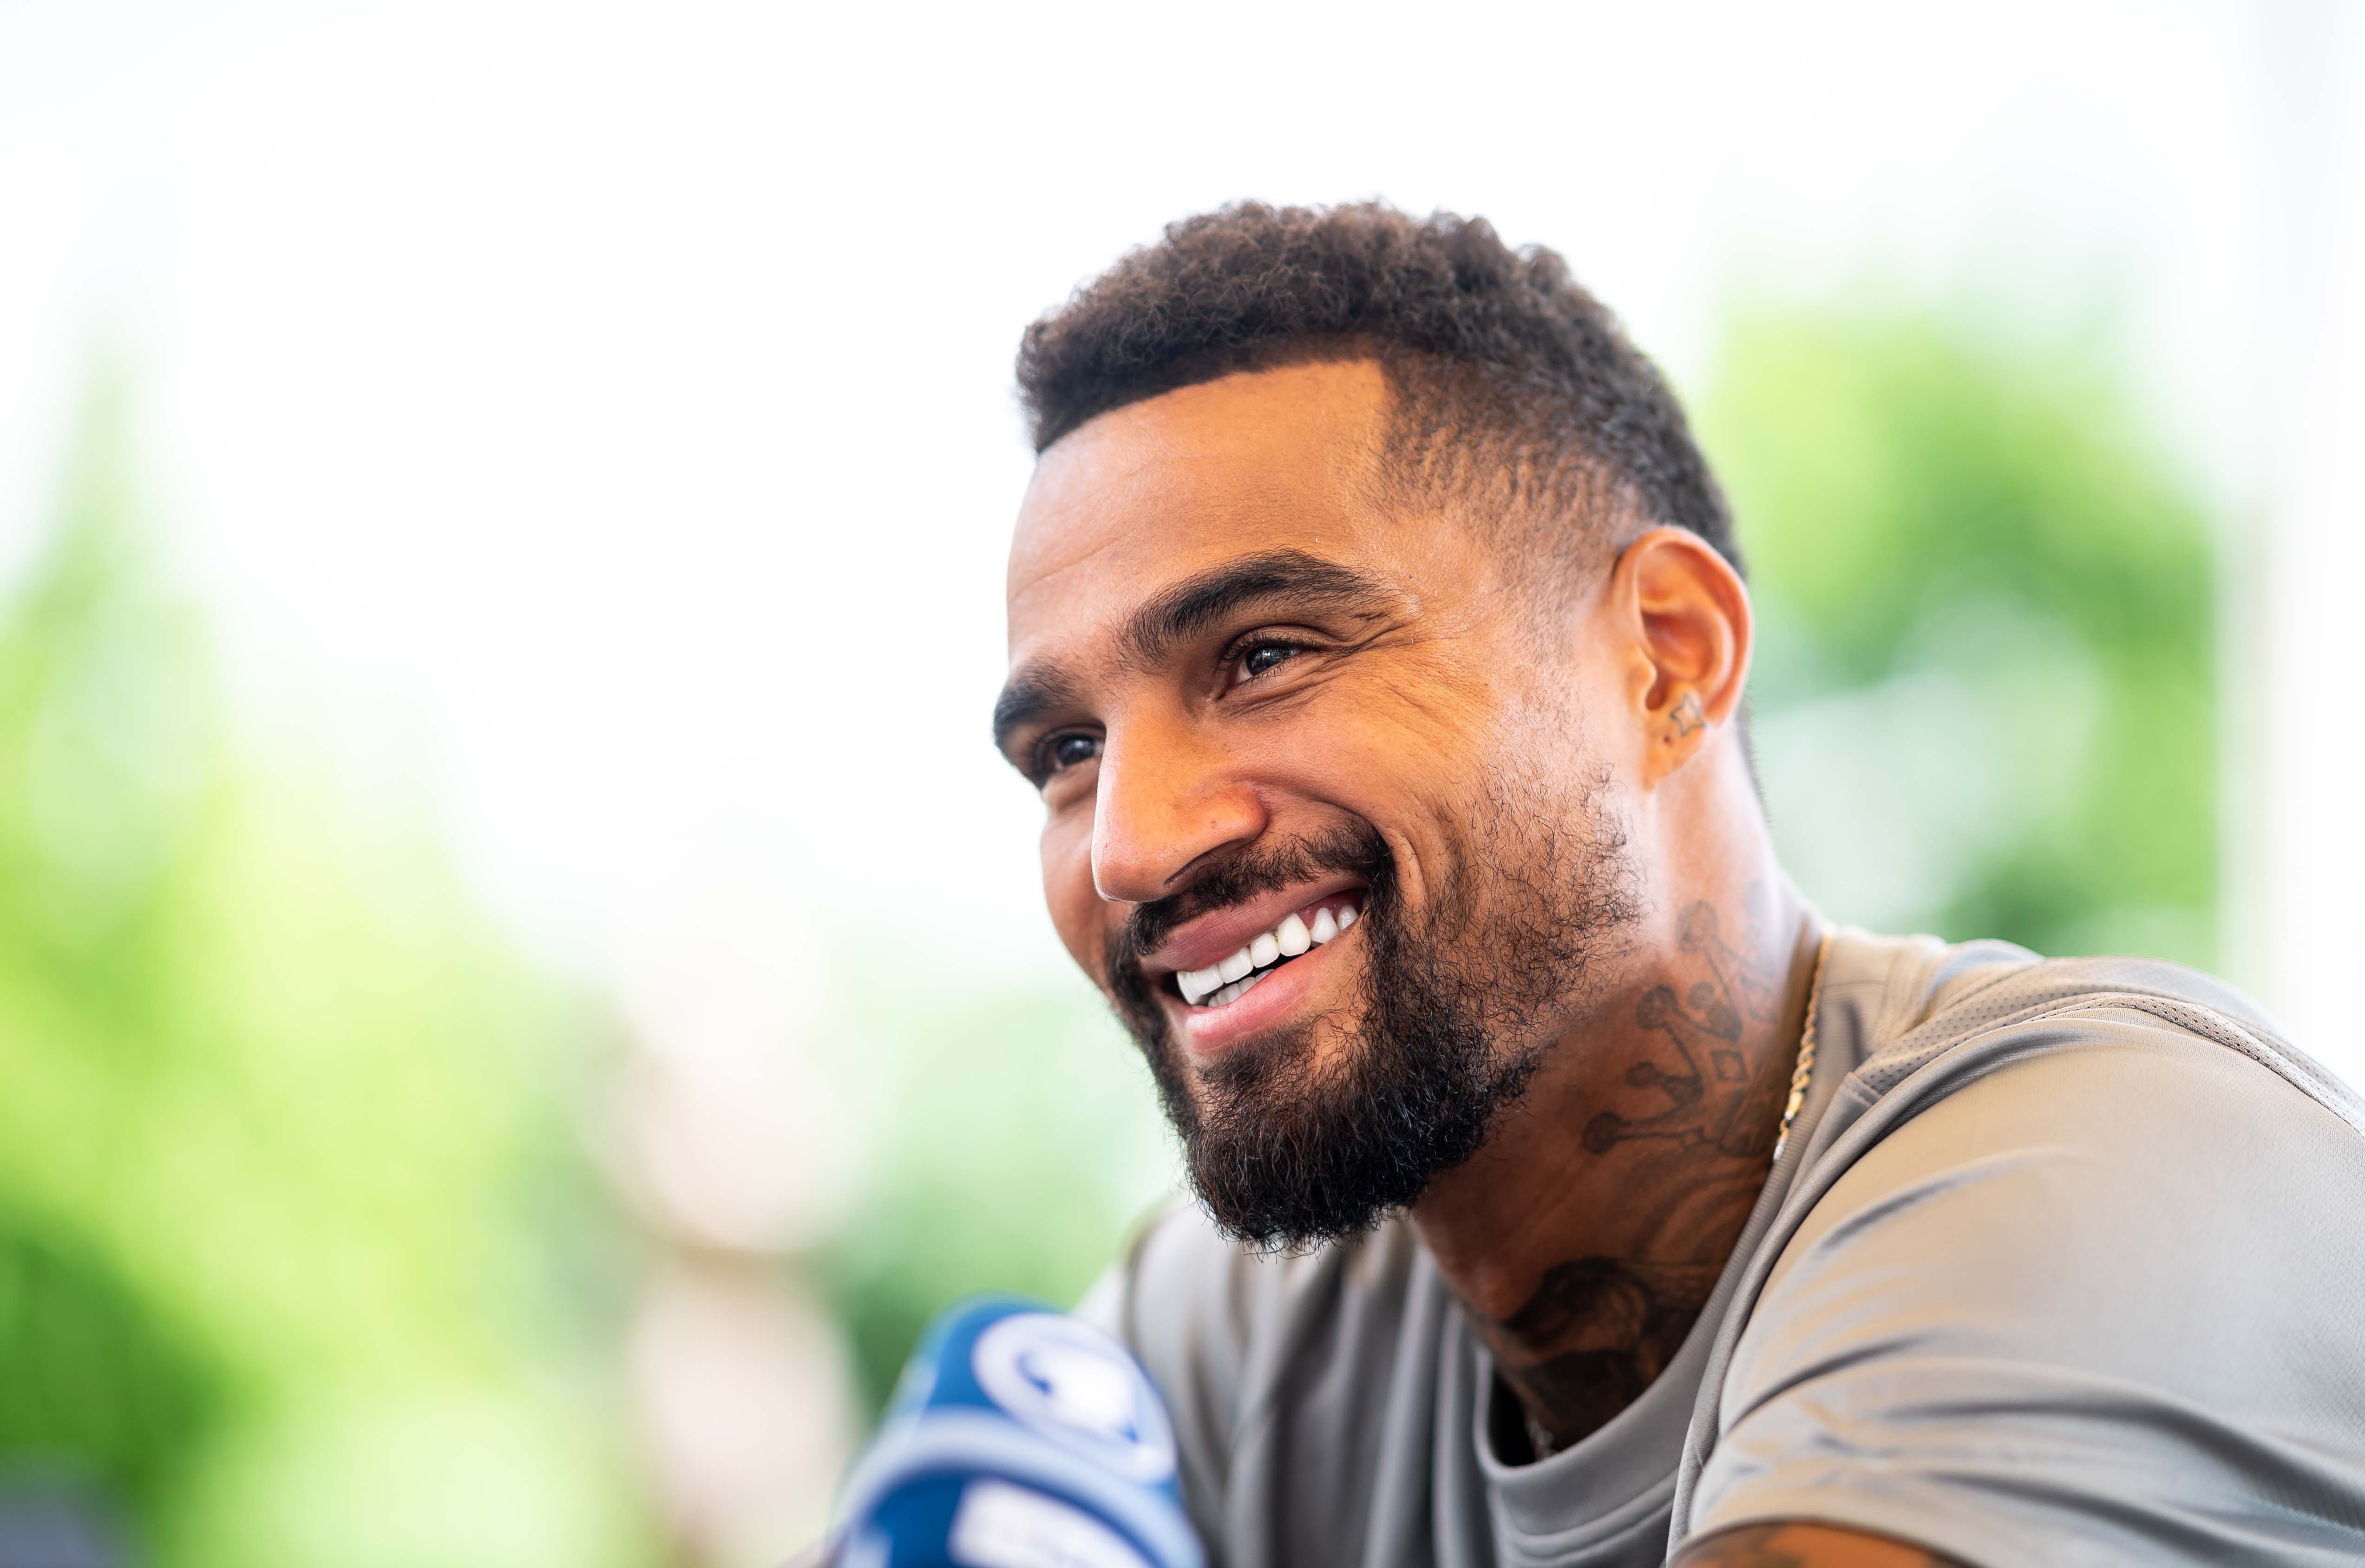 Prince Boateng smiling during a press conference.